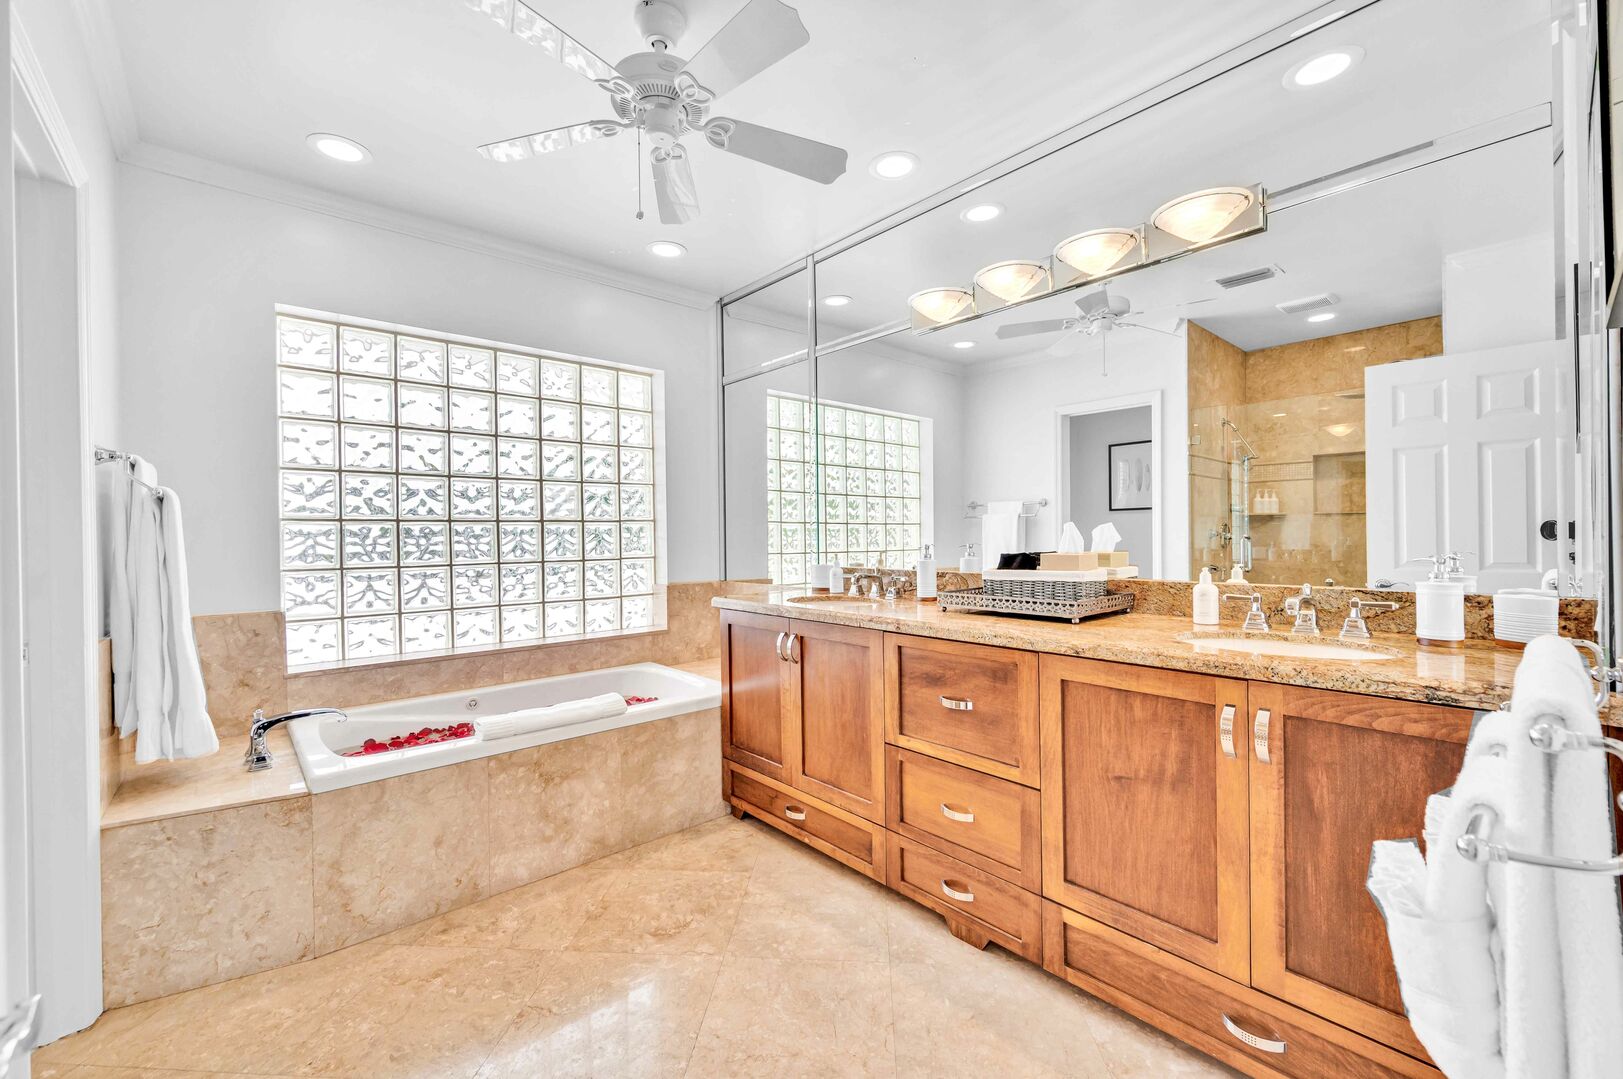 The master bathroom features a double vanity, large soaking tub and separate shower.